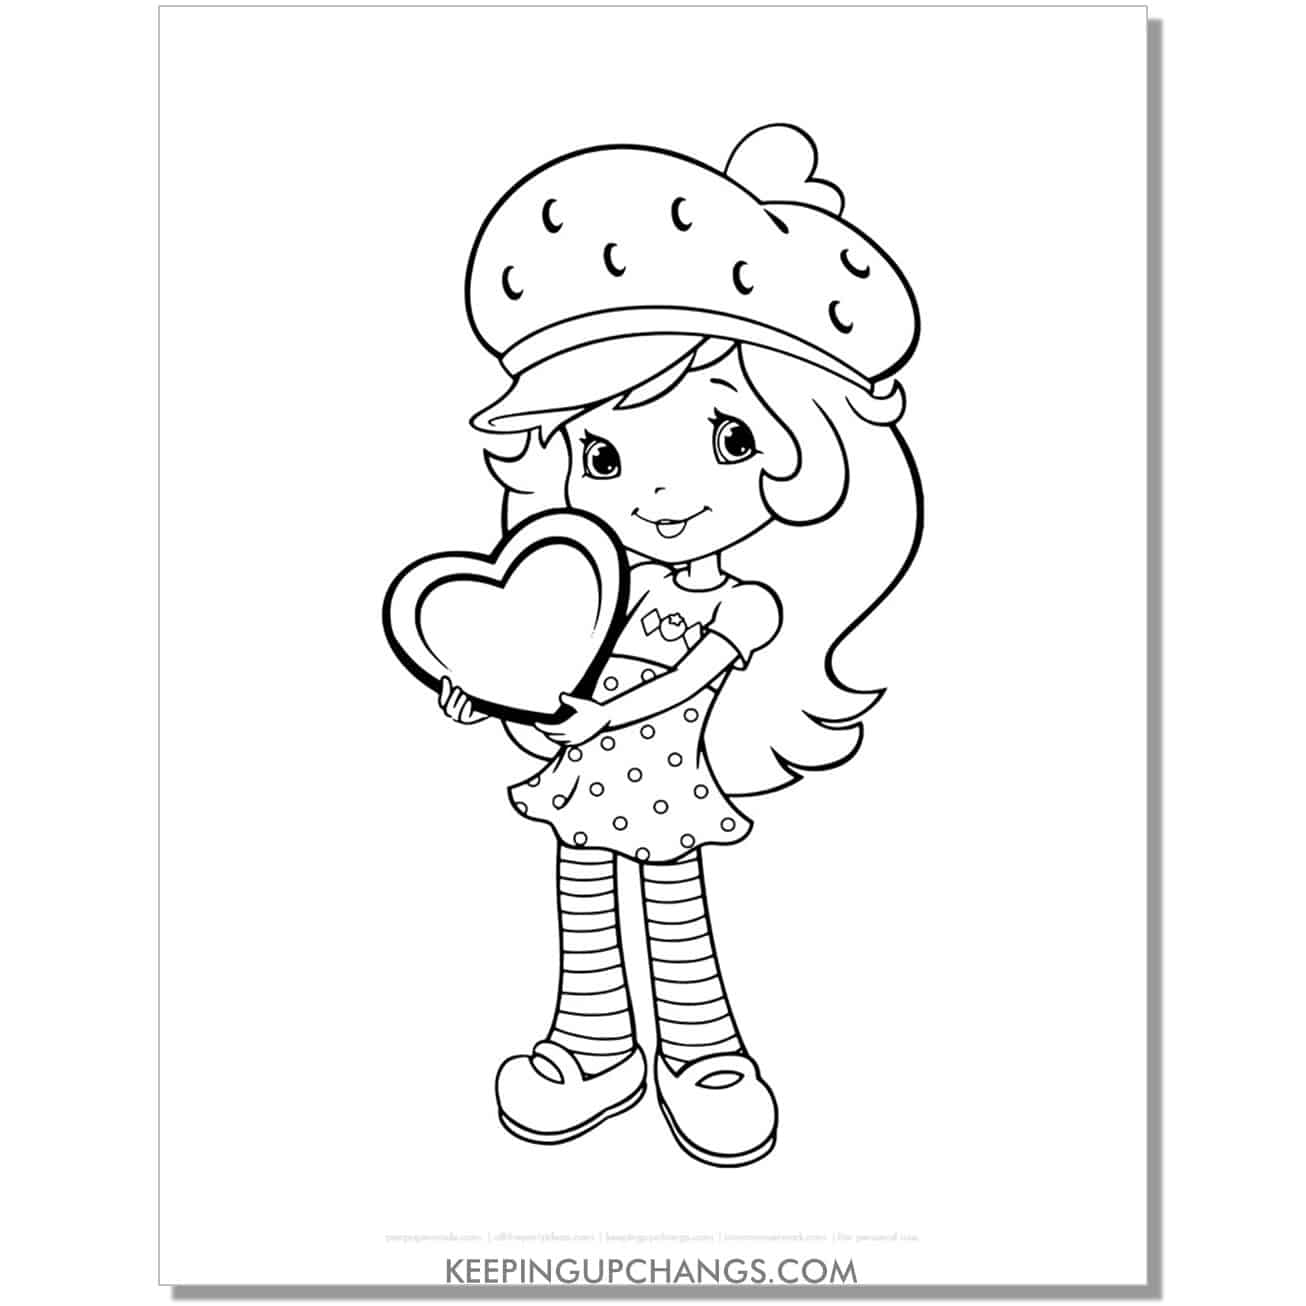 free valentine heart strawberry shortcake coloring page, sheet.